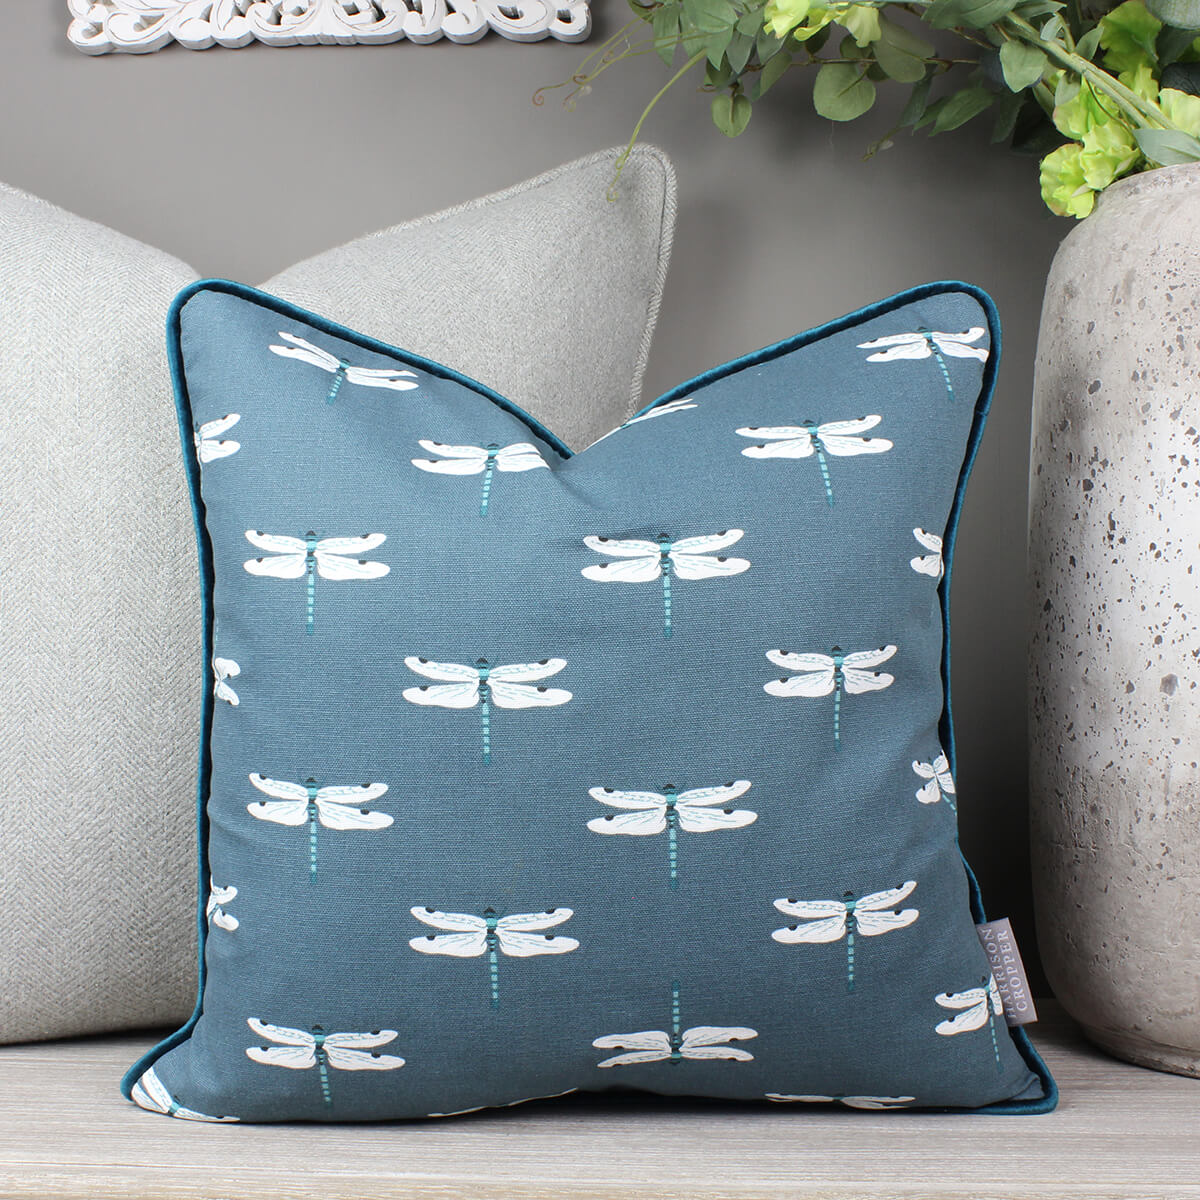 Dragonfly Sophie Allport Fabric Cushion